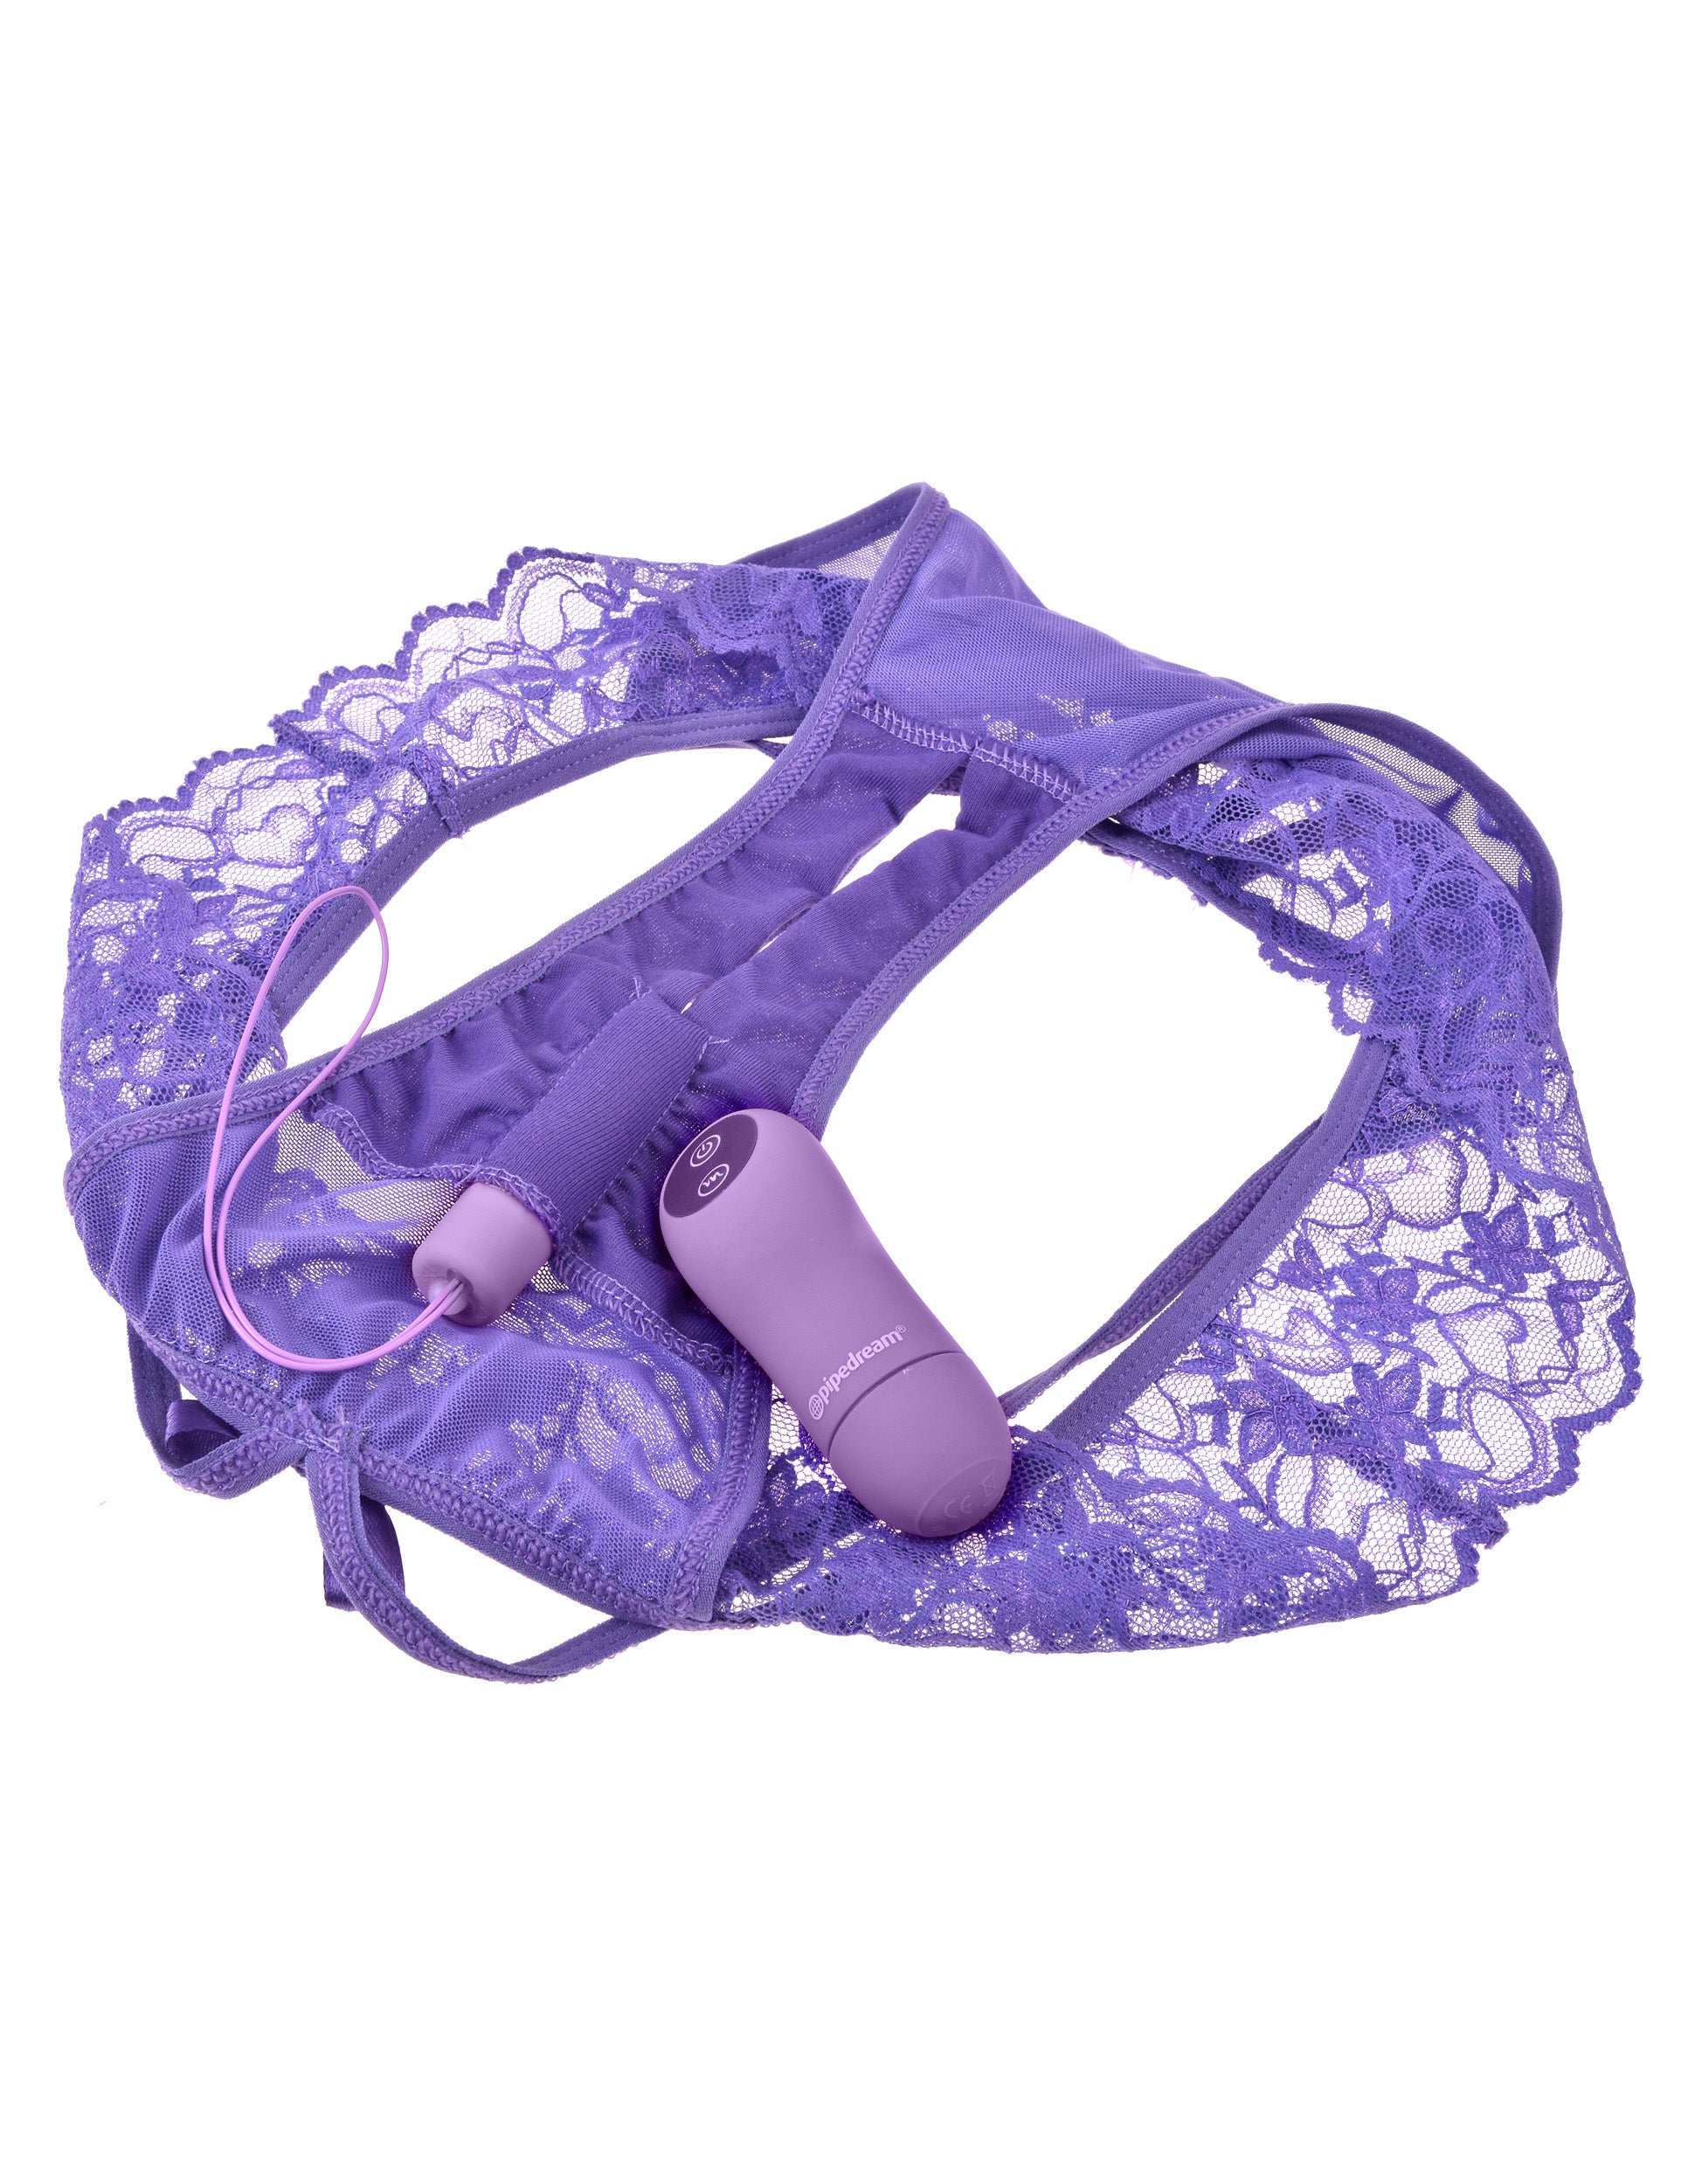 Fantasy for Her Crotchless Panty Thrill-Her-1